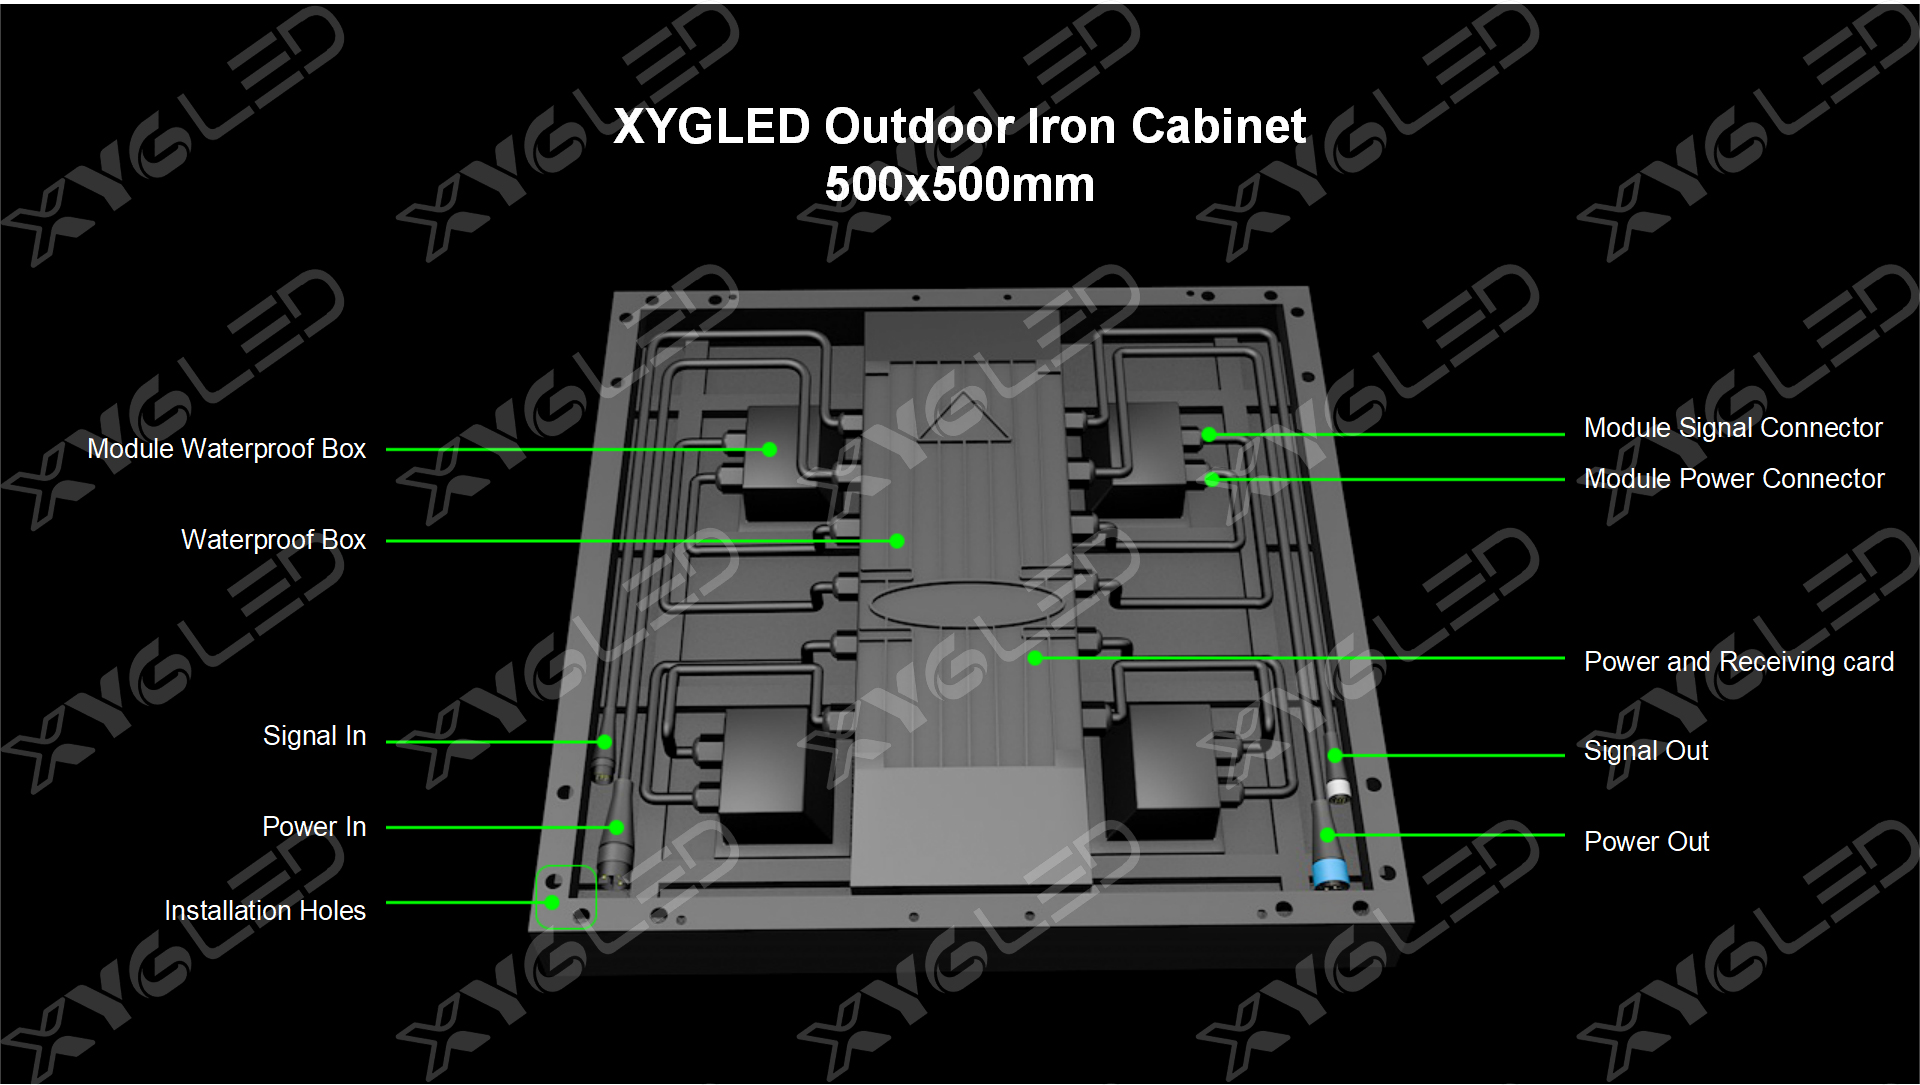 https://www.xygledscreen.com/outdoor-led-floor-display-screen-ip68-protection-level-high-brightness-non-slip-product/